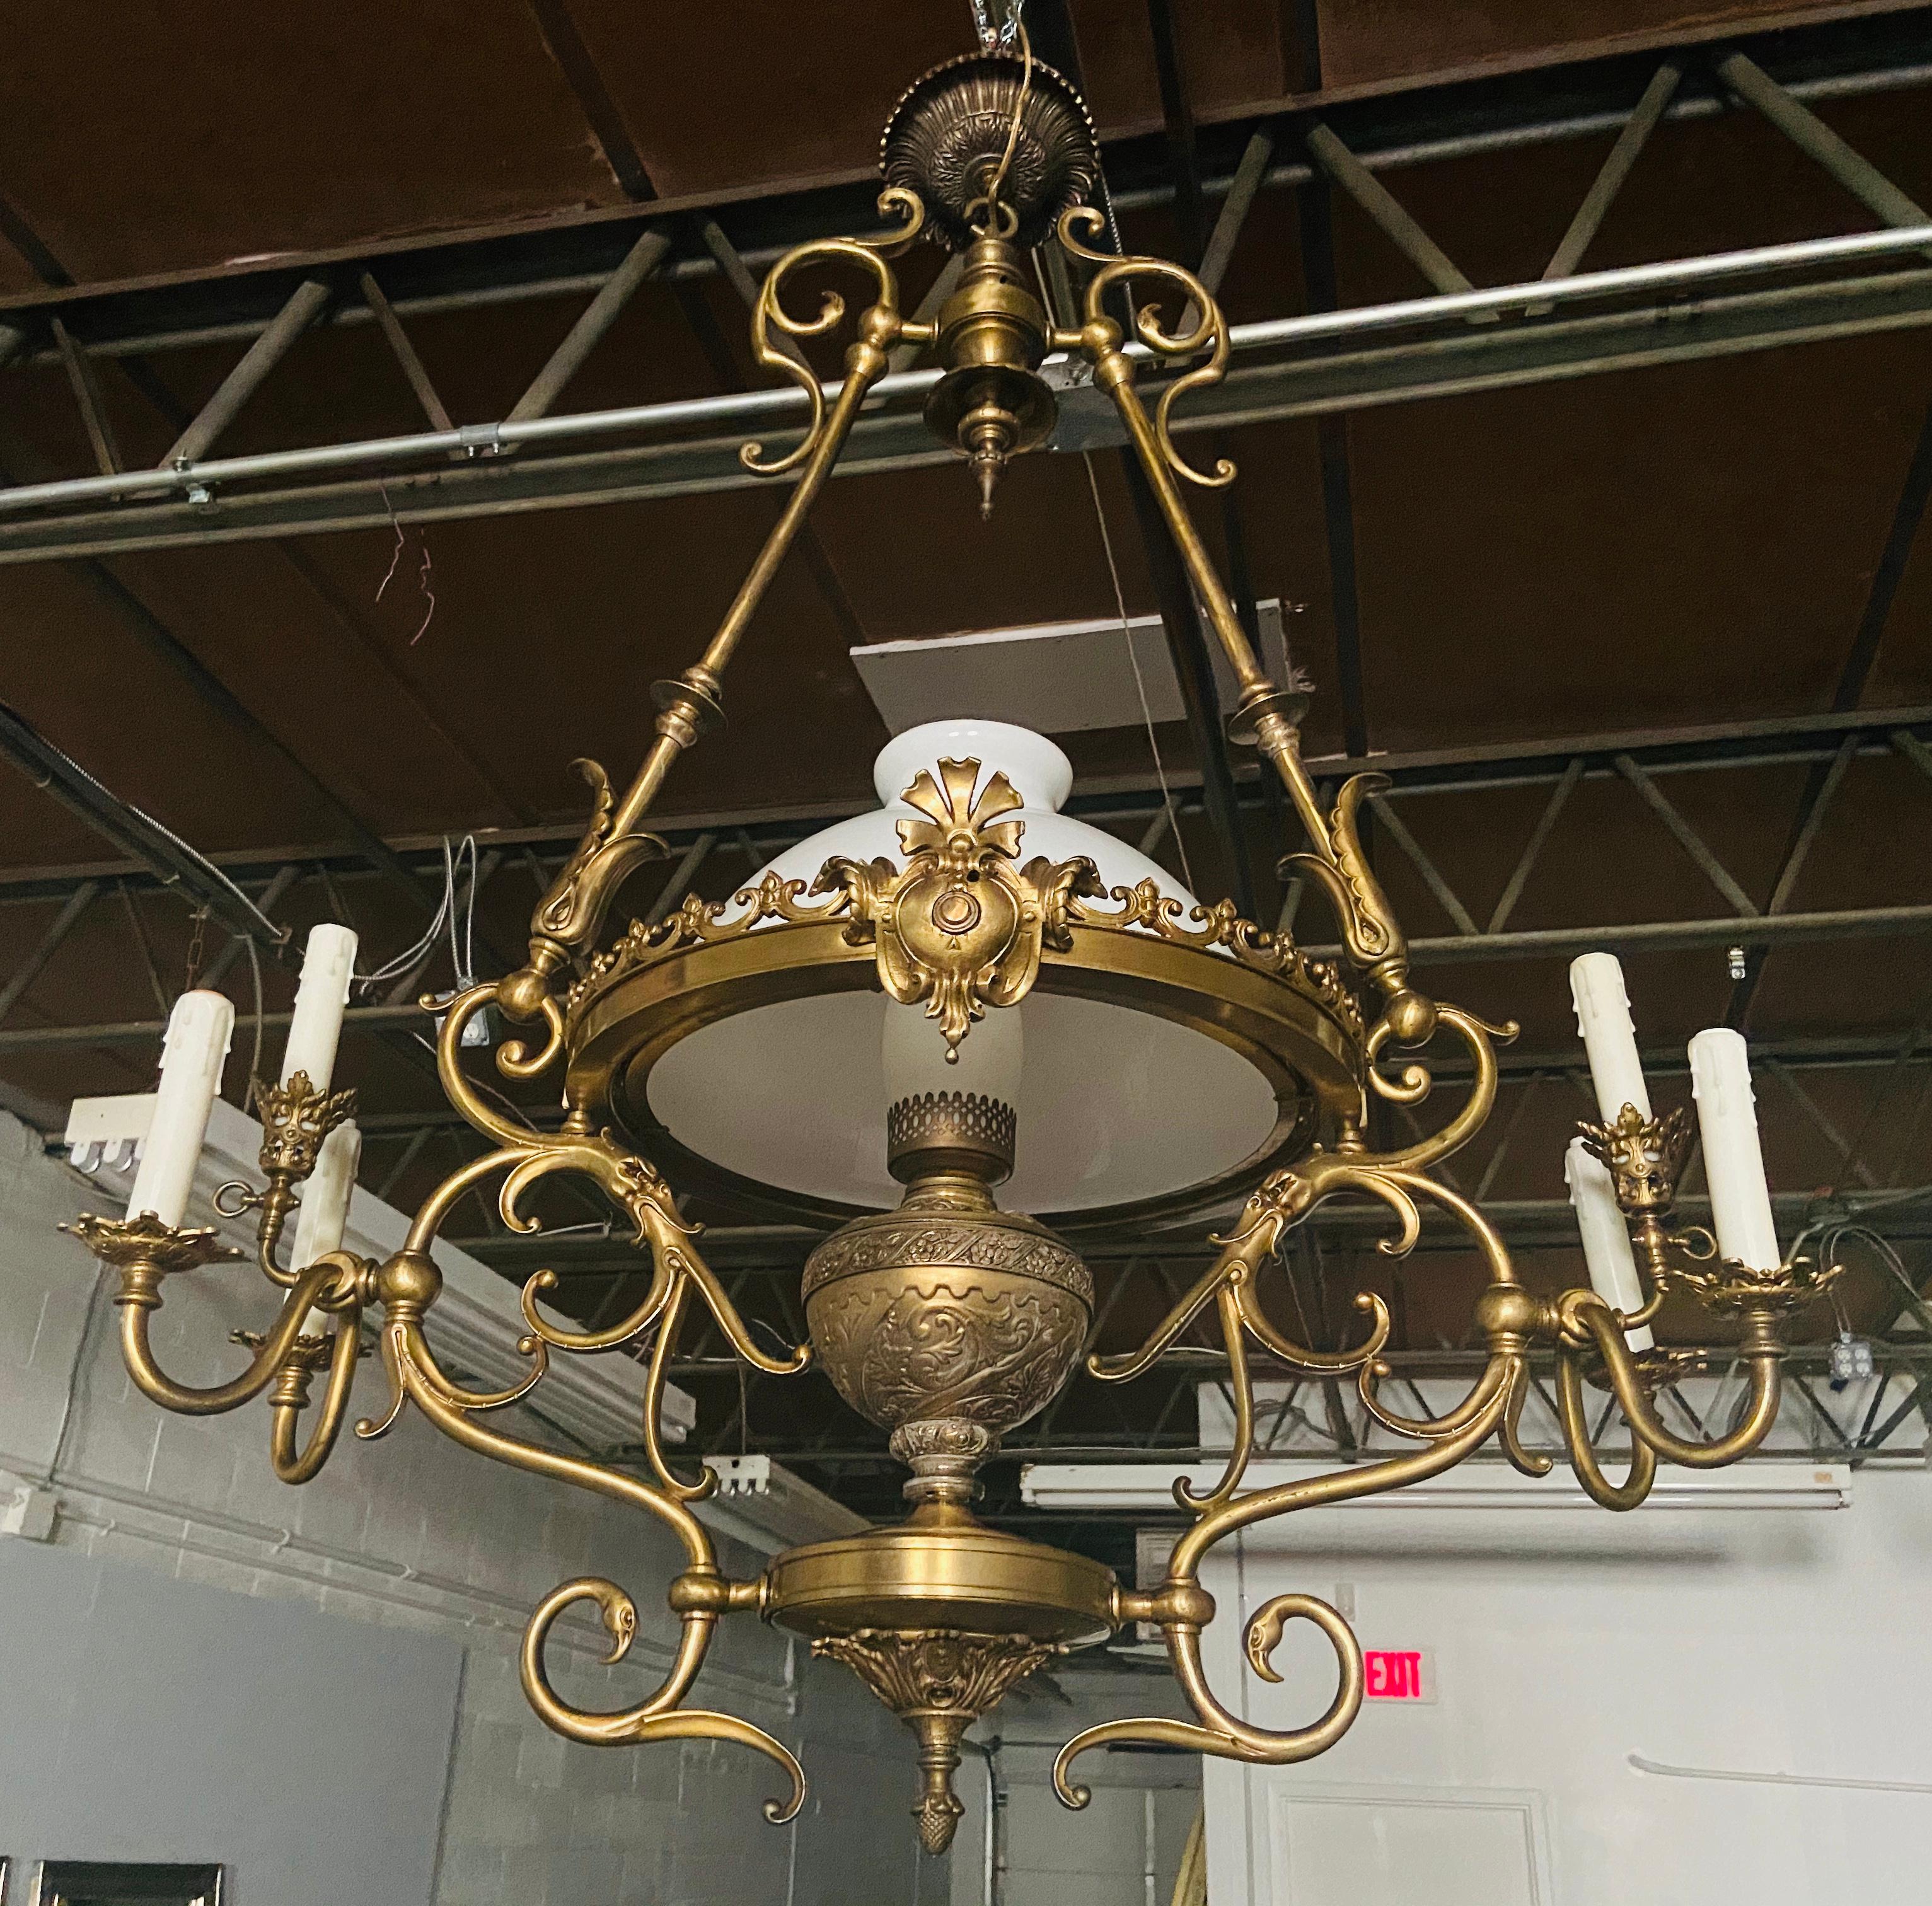 French Victorian bronze gas light chandelier
This elegant Victorian bronze gas light chandelier features fine details and 7 lights. Each side has three lights setting on three foliate detailed arms.
The center oil fount converted to a center light